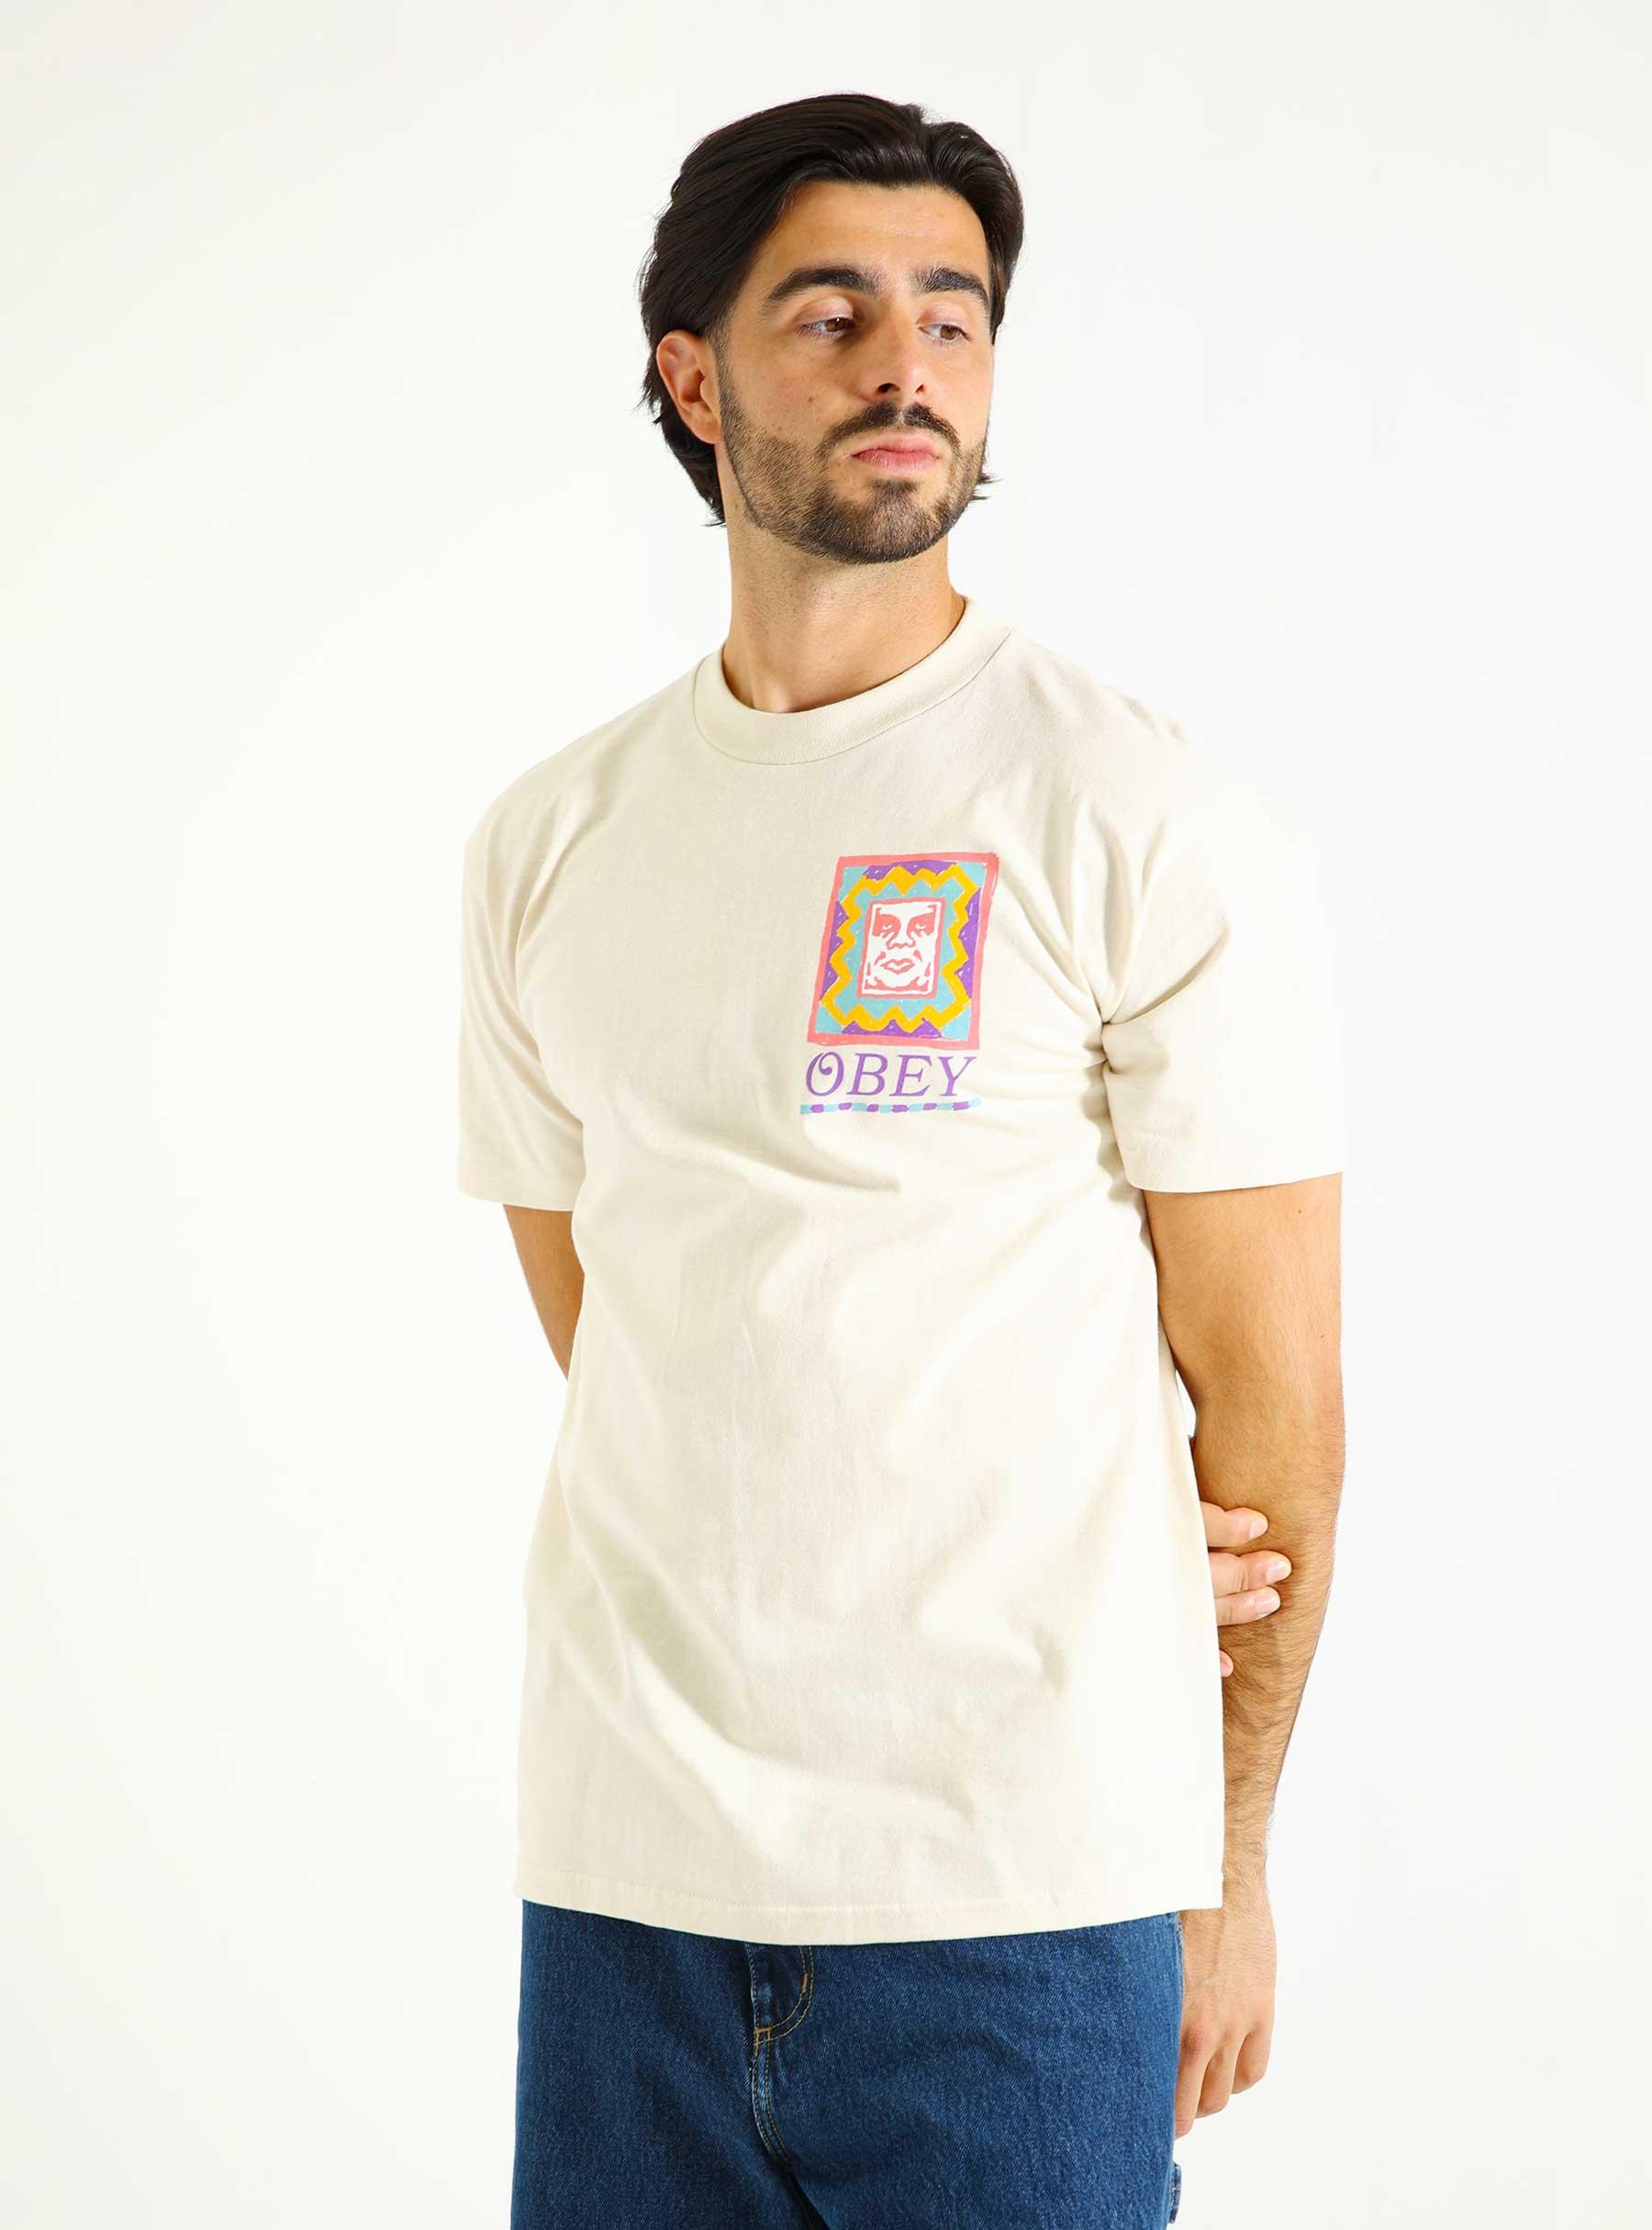 Obey Throwback T-Shirt Cream 165263786-CRM